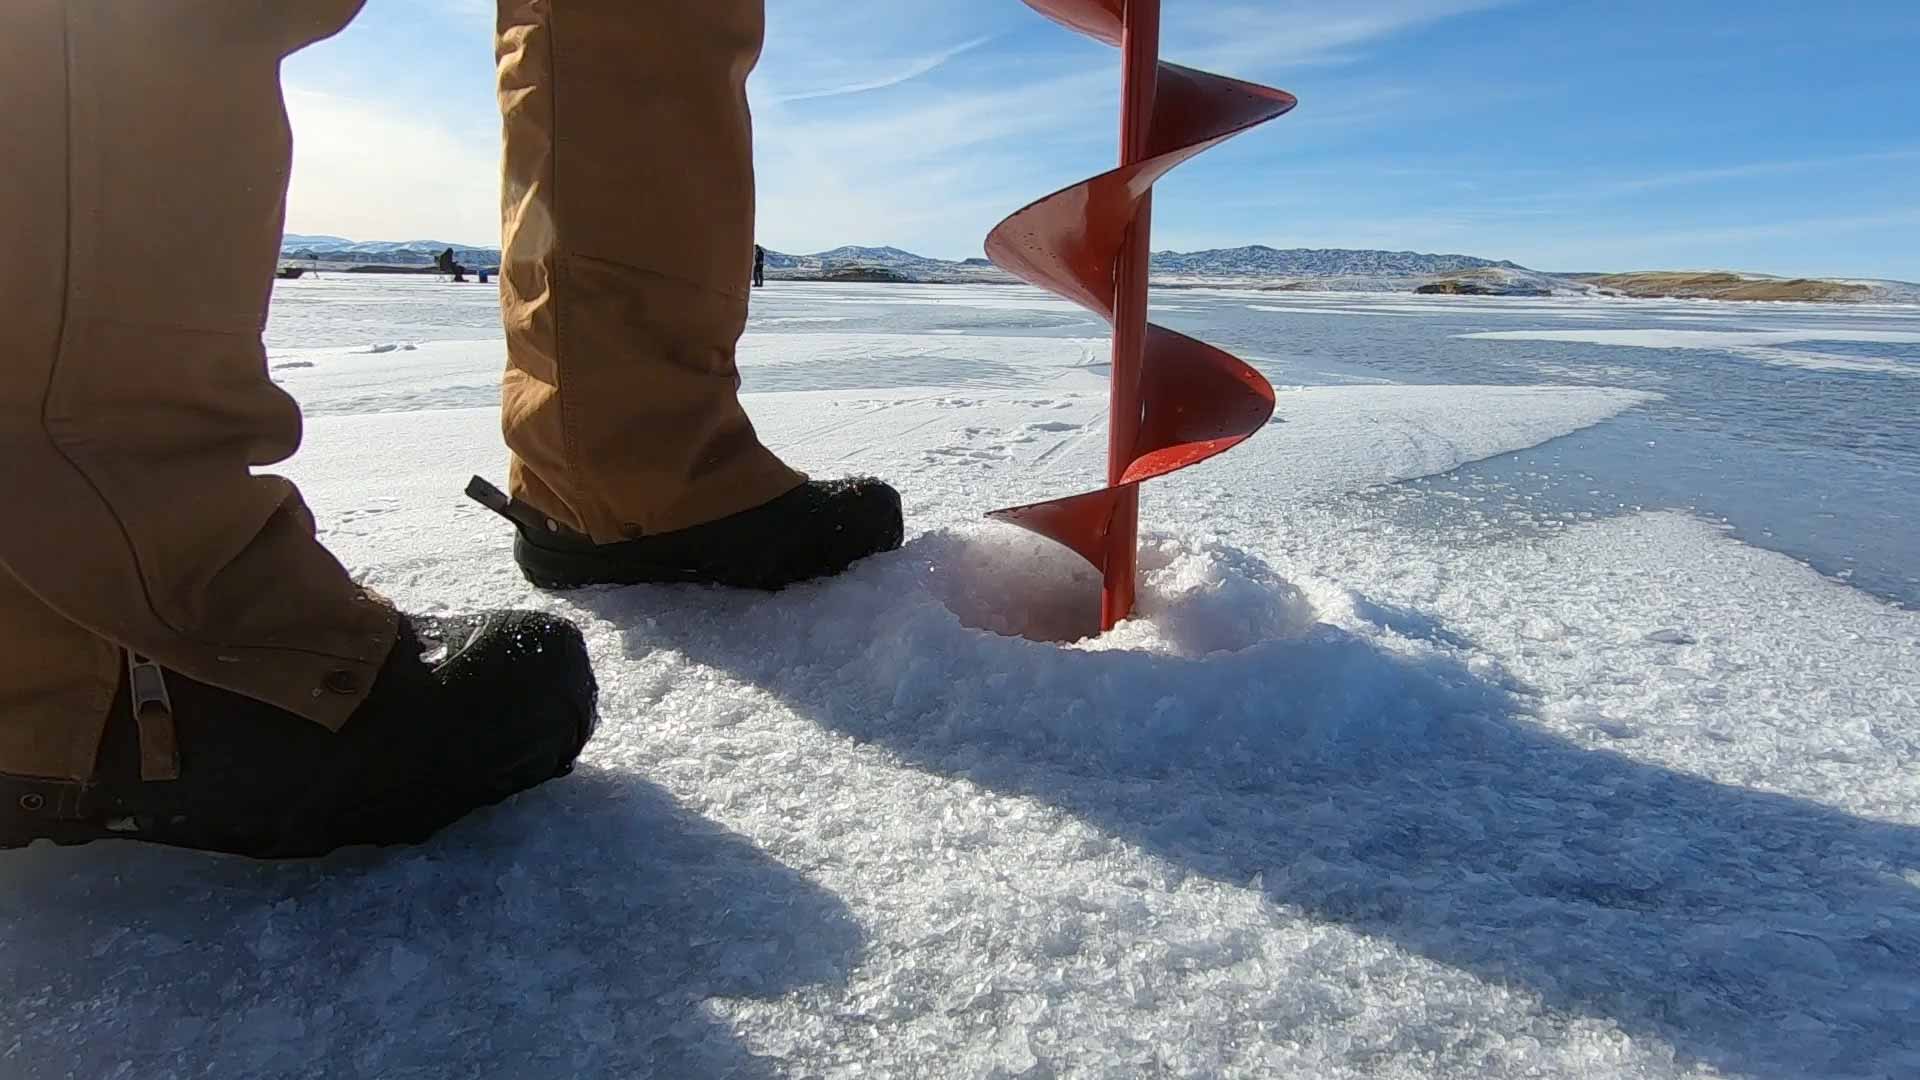 Red auger drill boring through ice on a frozen lake